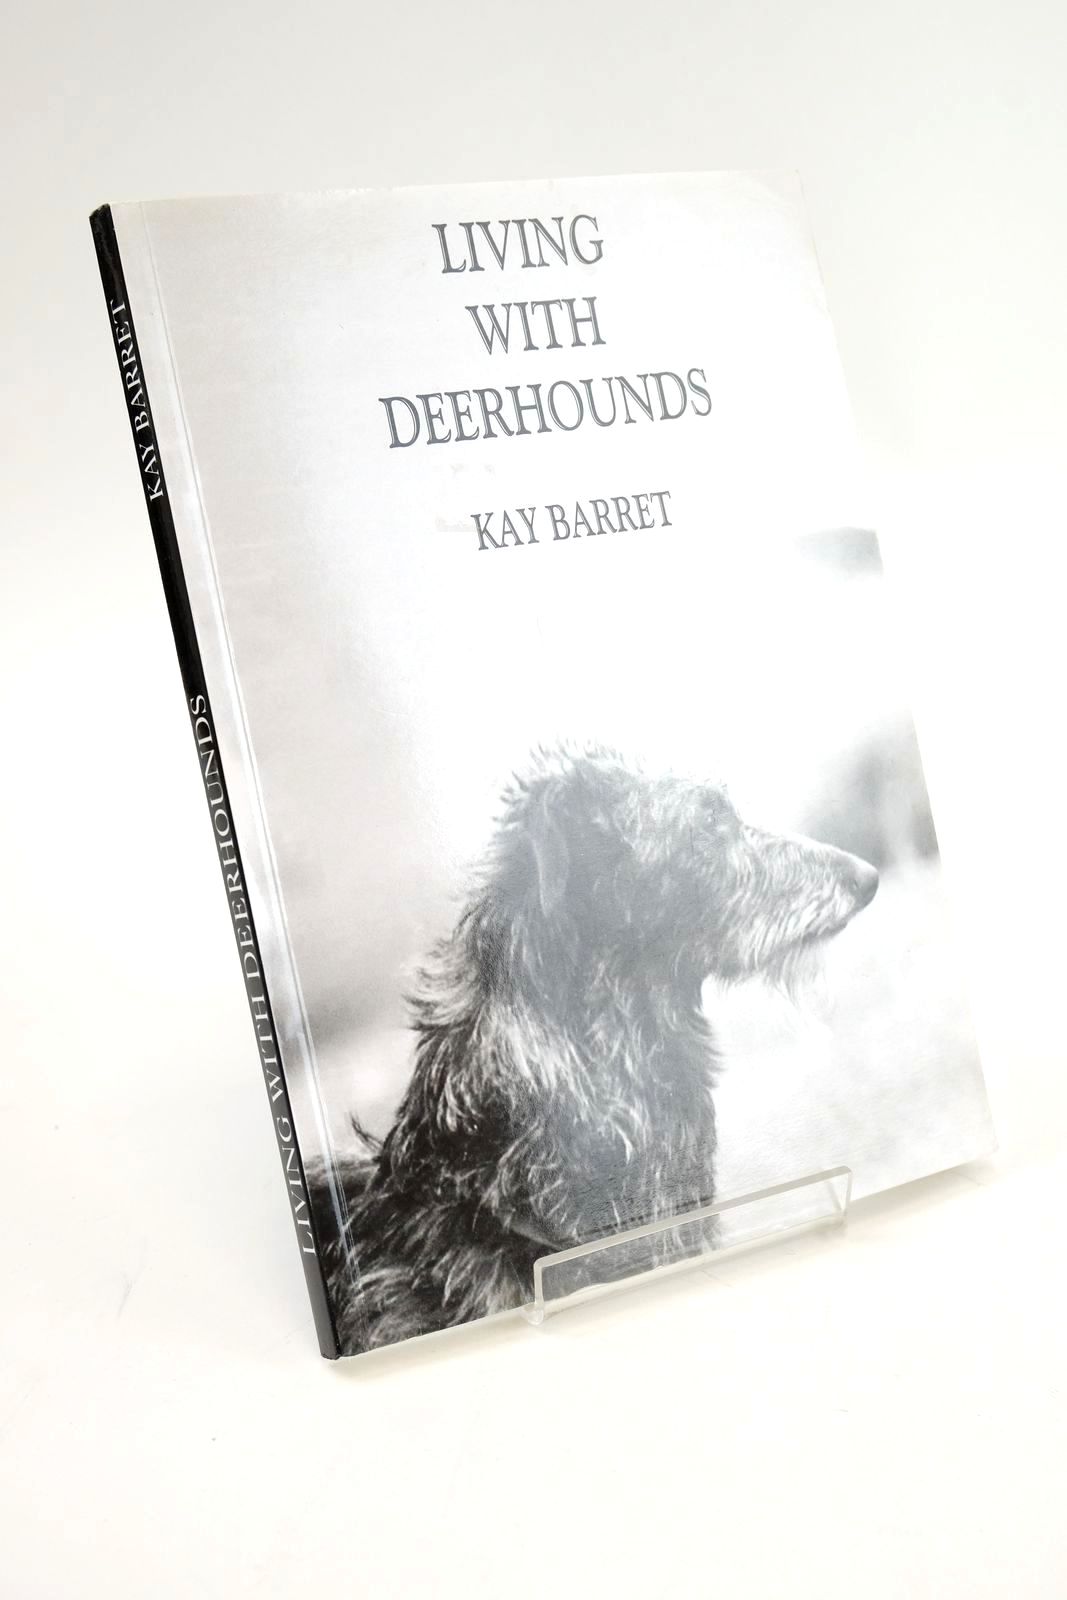 Photo of LIVING WITH DEERHOUNDS written by Barret, Kay published by Kay Barret (STOCK CODE: 1324935)  for sale by Stella & Rose's Books